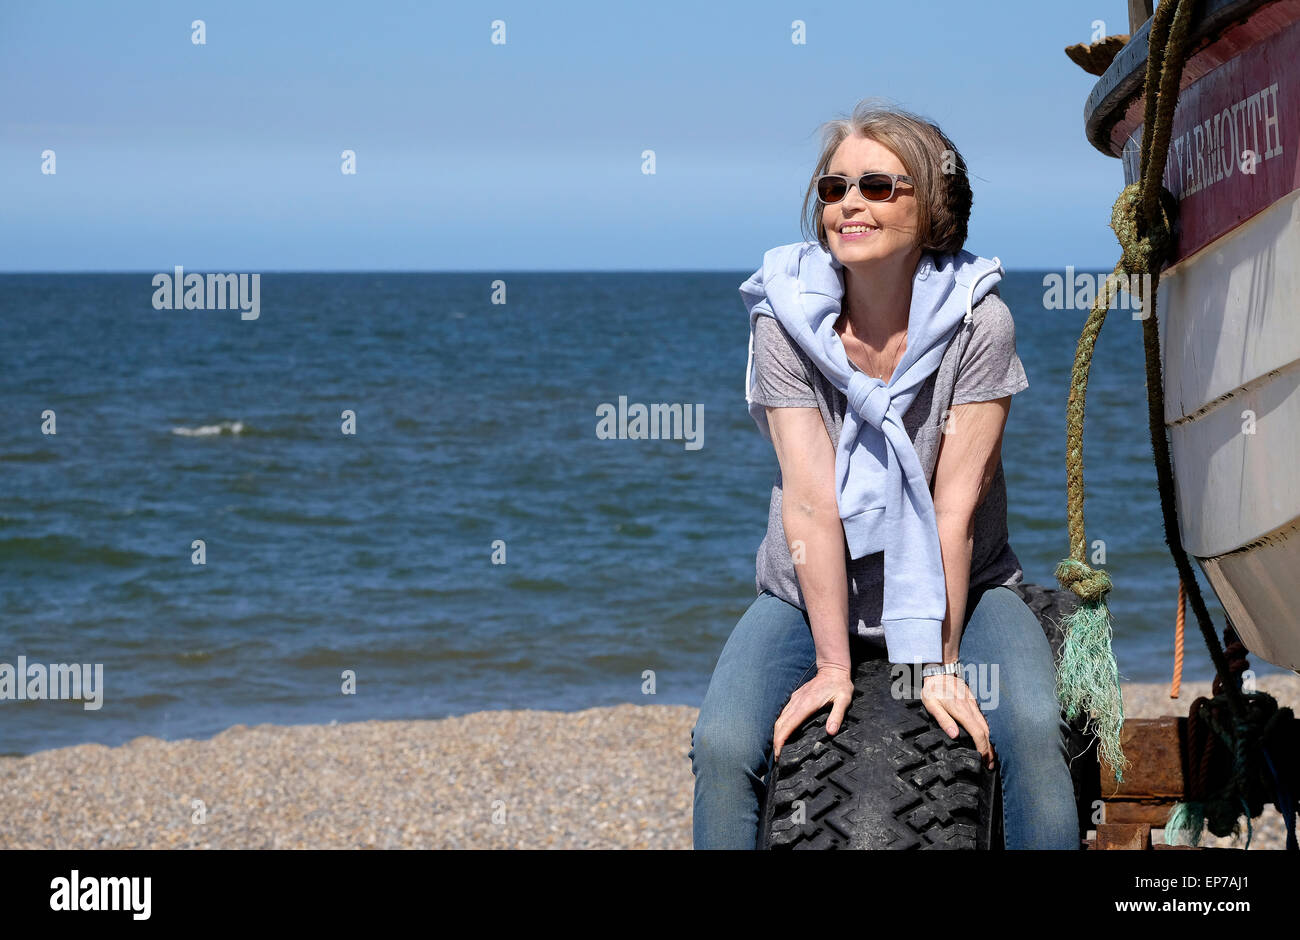 Senior woman sitting by fishing boat on beach Banque D'Images